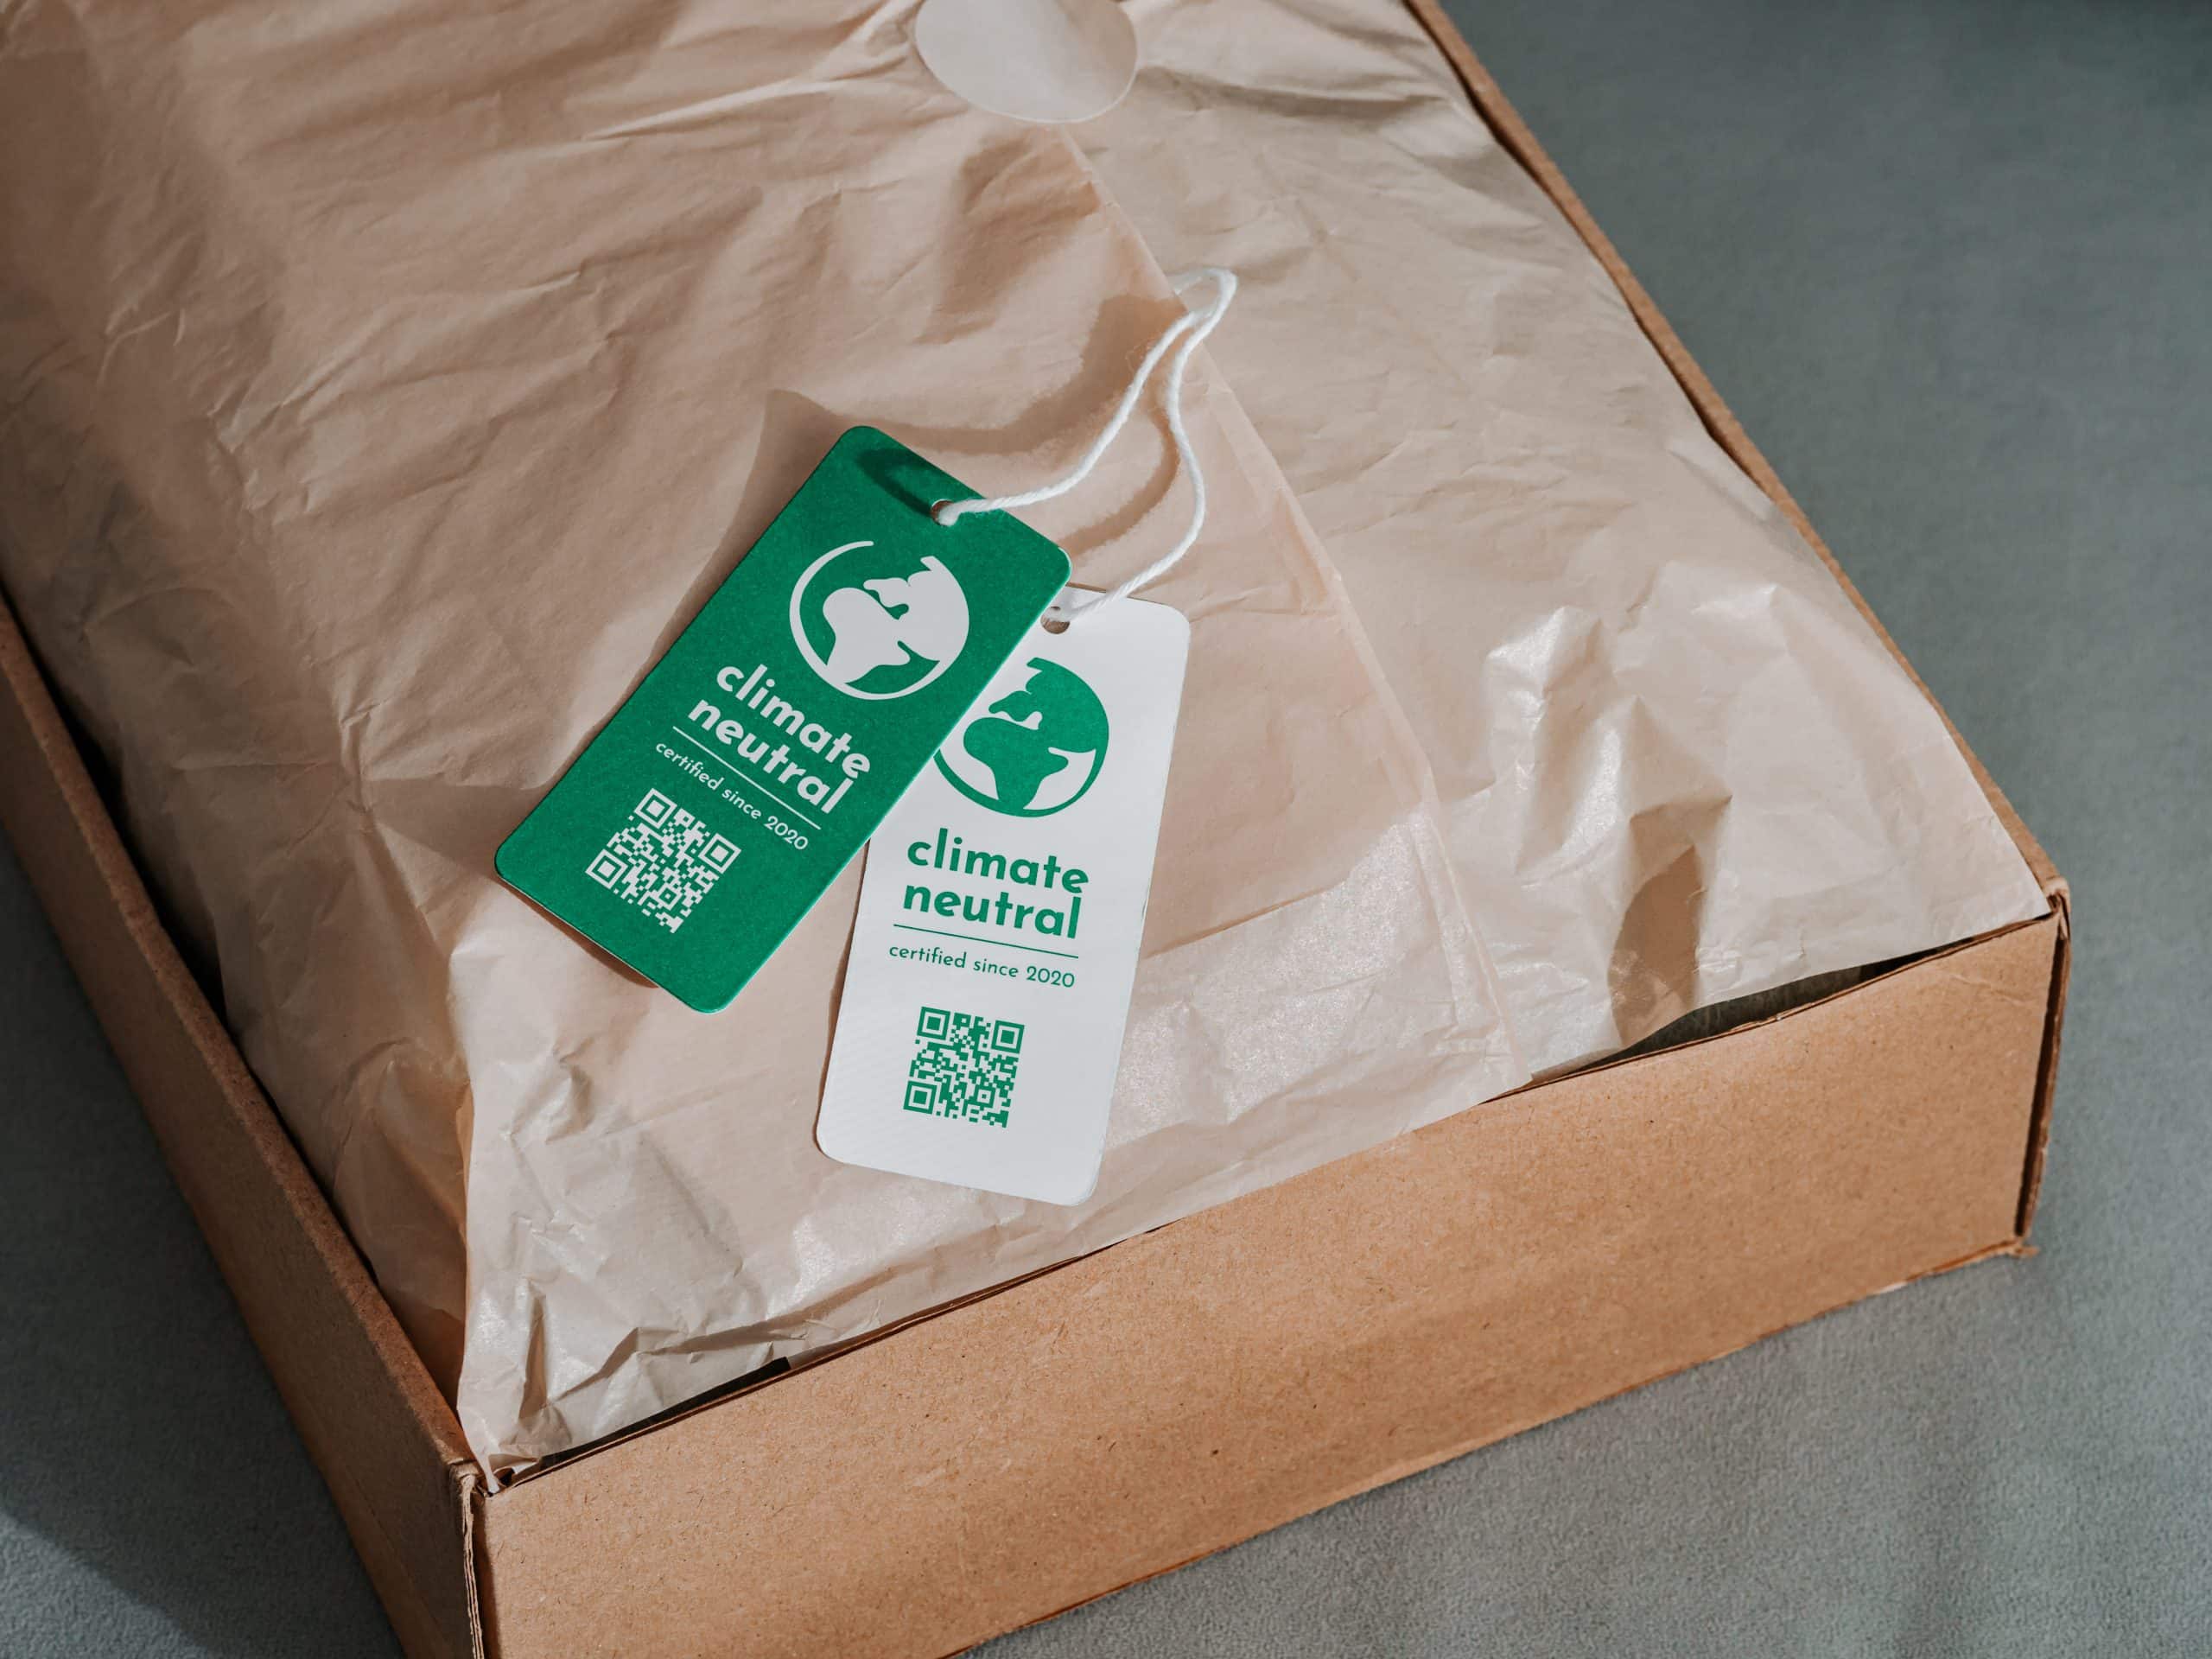 Climate neutral and carbon packaging